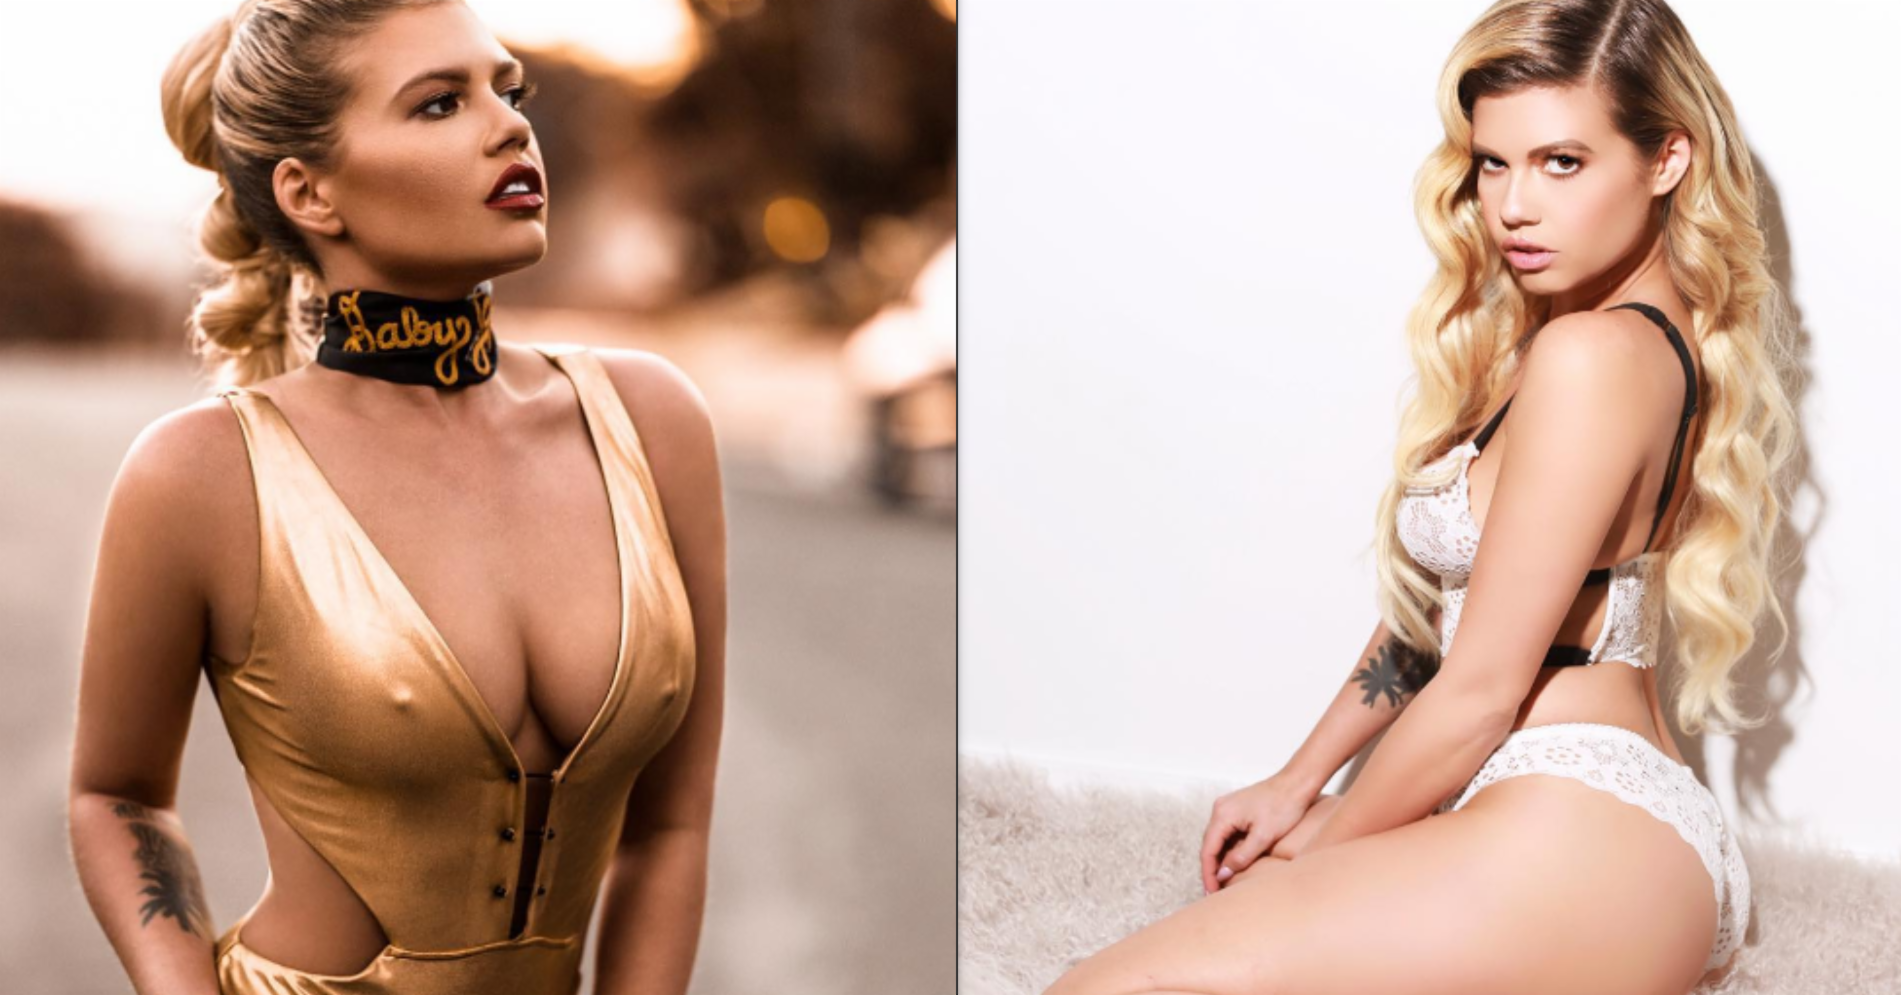 bandung shop recommends chanel westcoast nude pic